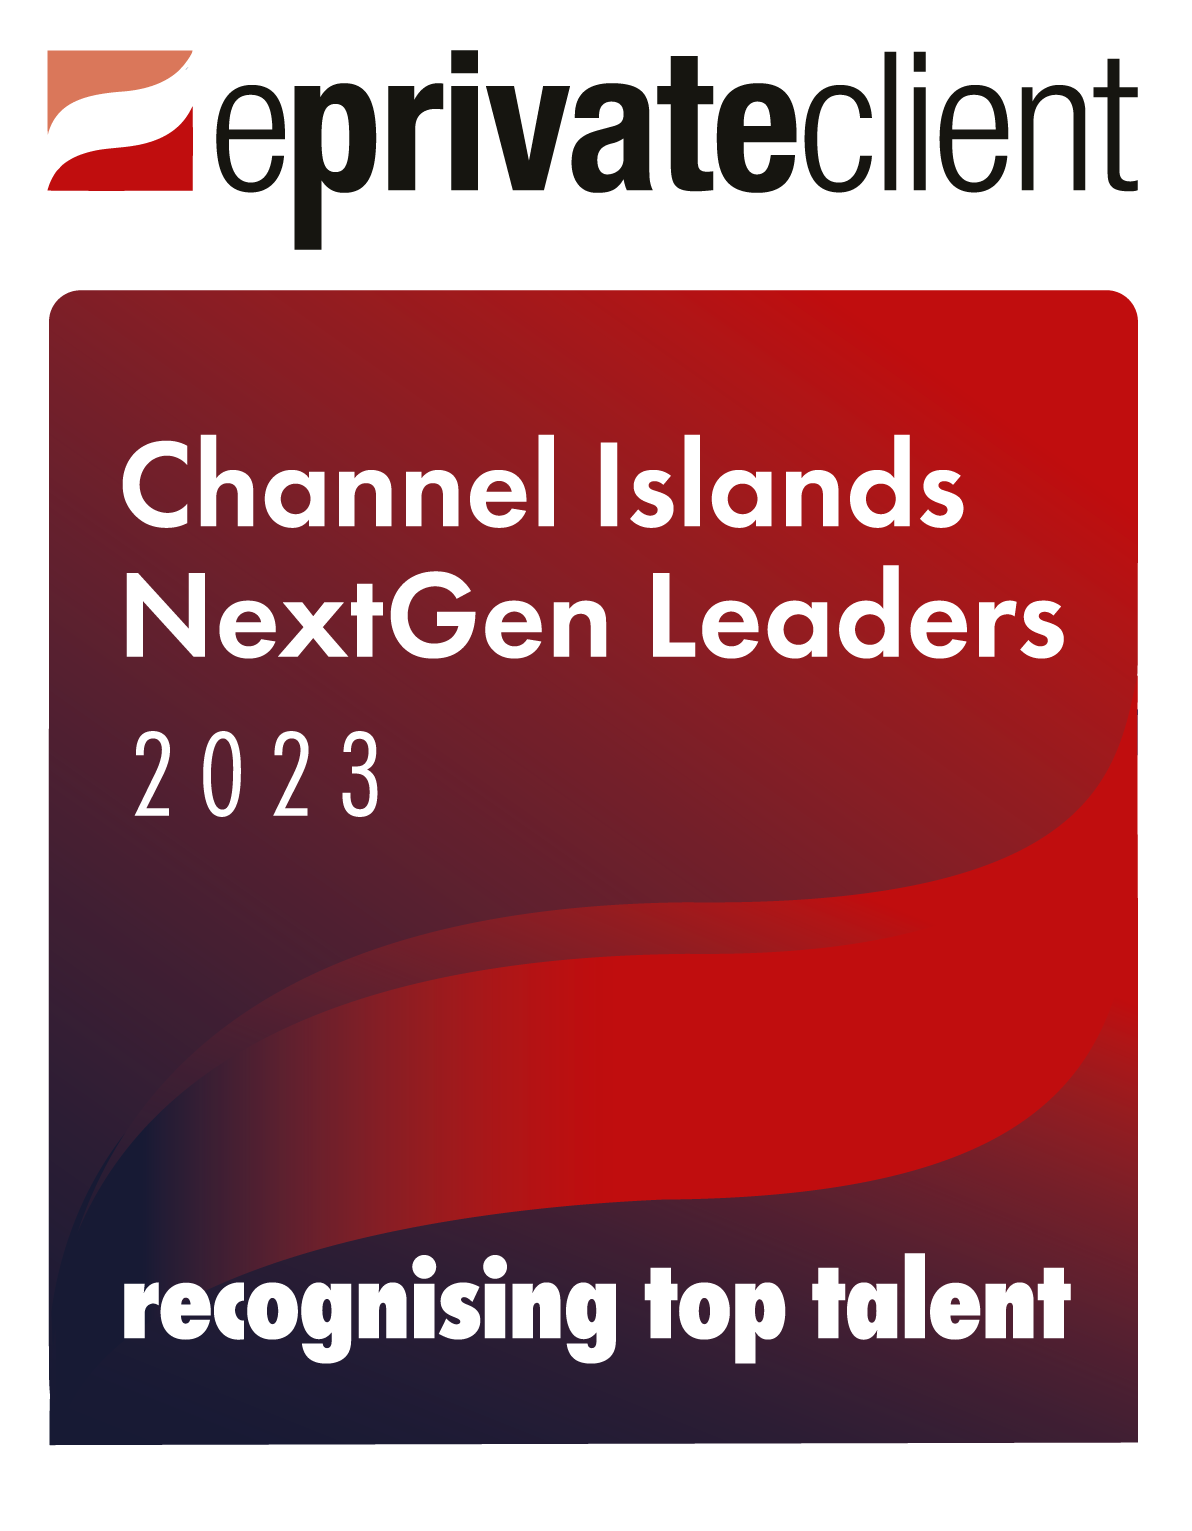 Just two weeks left to nominate the 2023 eprivateclient Channel Islands NextGen Leaders